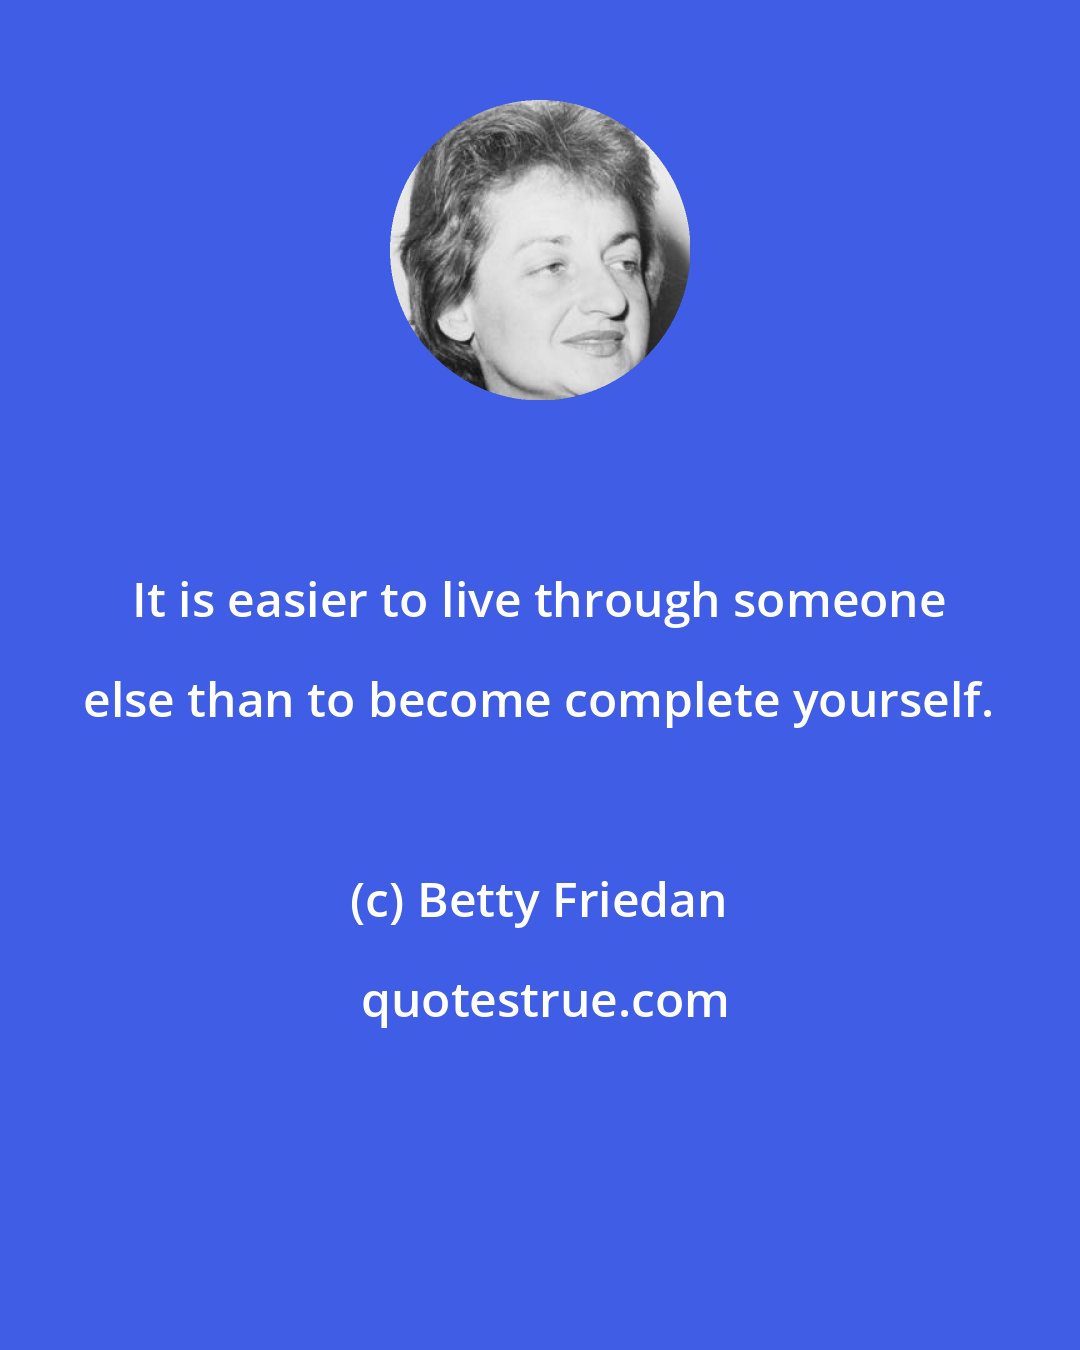 Betty Friedan: It is easier to live through someone else than to become complete yourself.